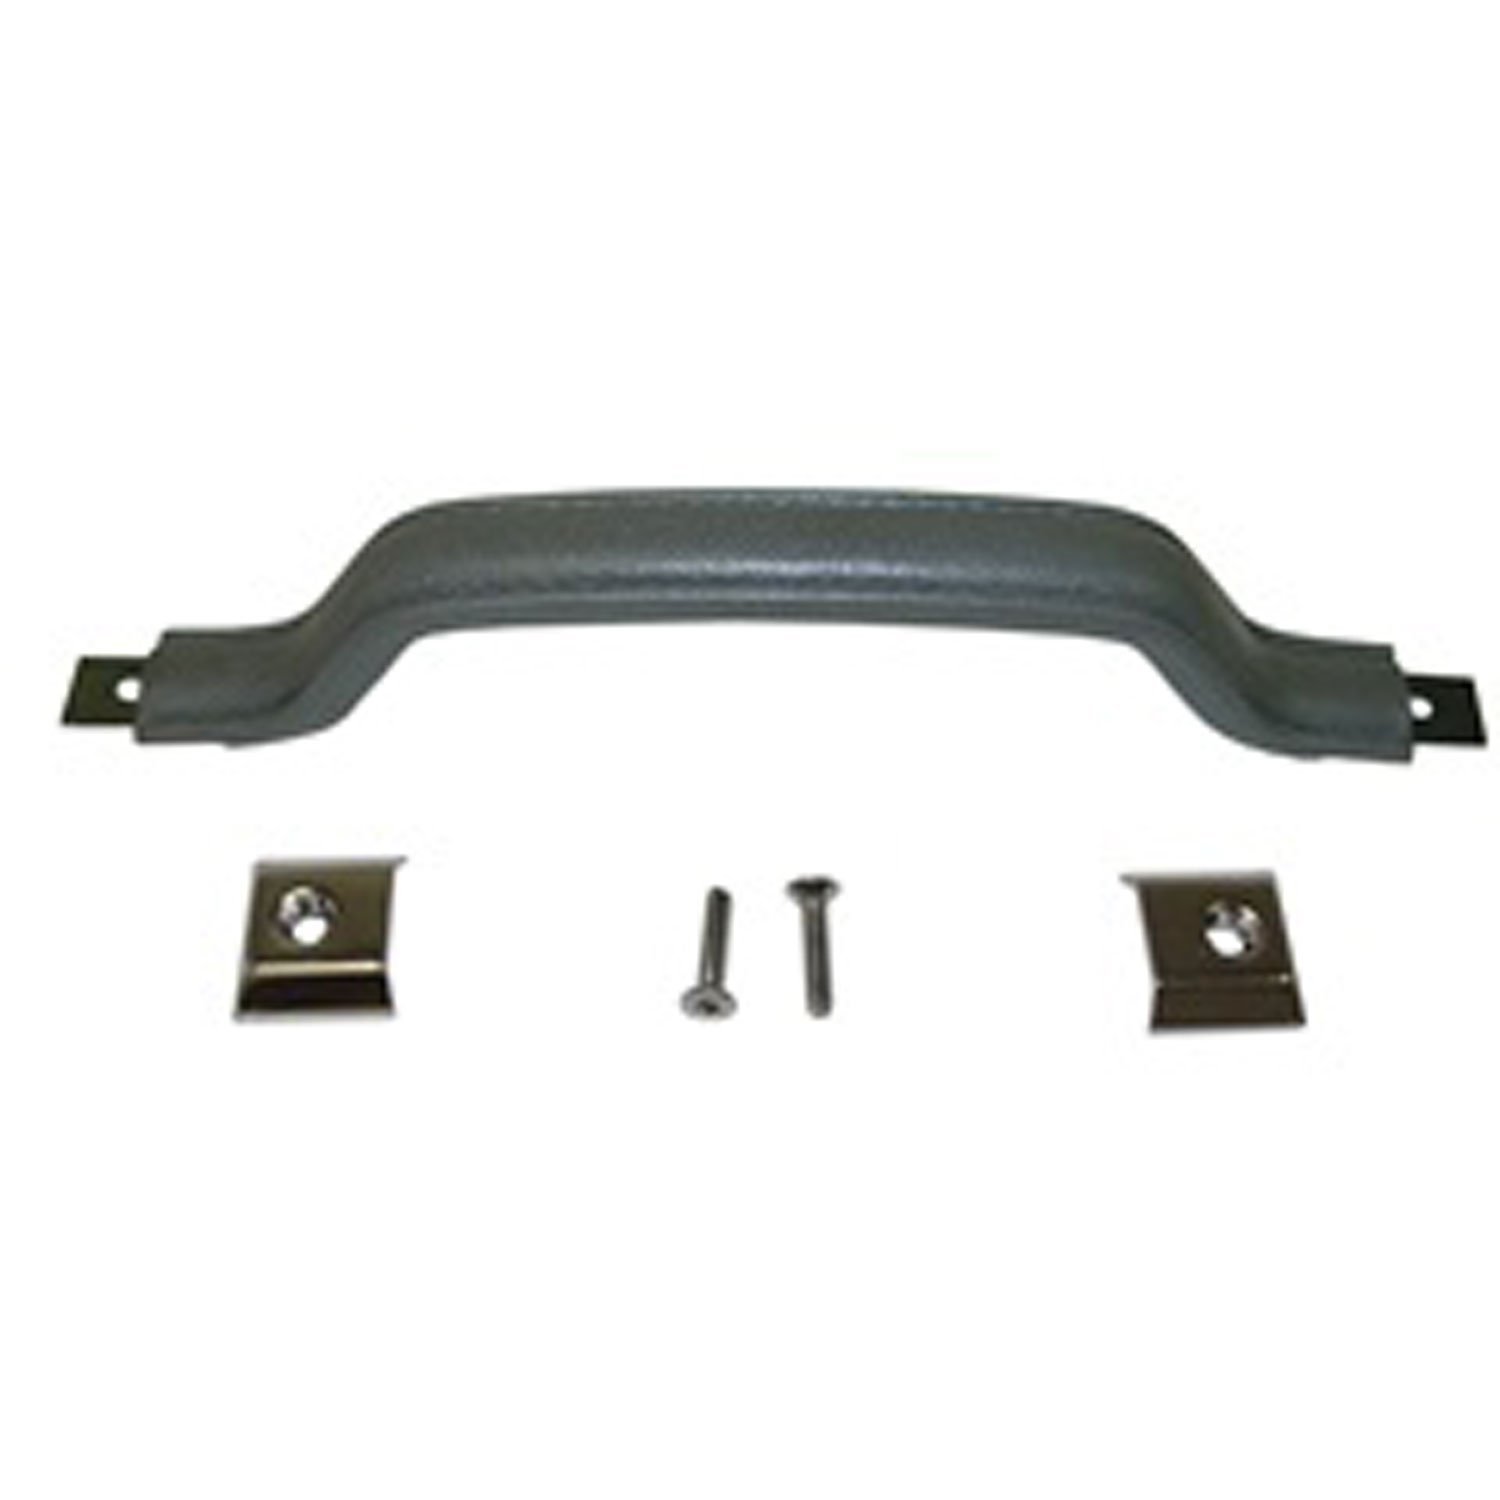 This gray interior door pull kit from Omix-ADA